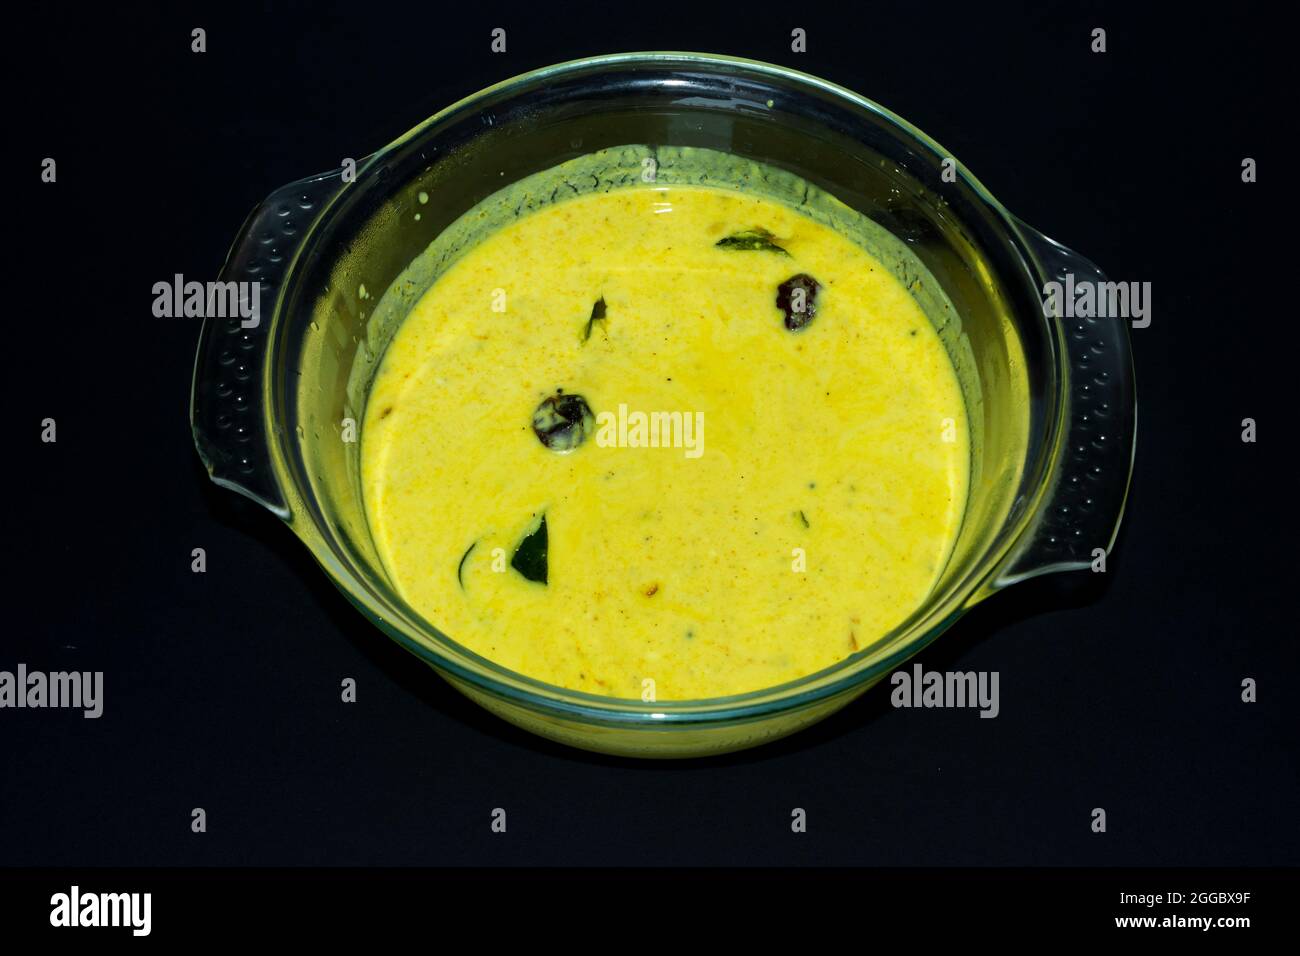 Closeup Image Of Kerala Onam Special Traditional Yellow Buttermilk Curry Also Known As Moru Curry, Pulissery, Kachiya Moru In Glass Bowl. Black Backgr Stock Photo